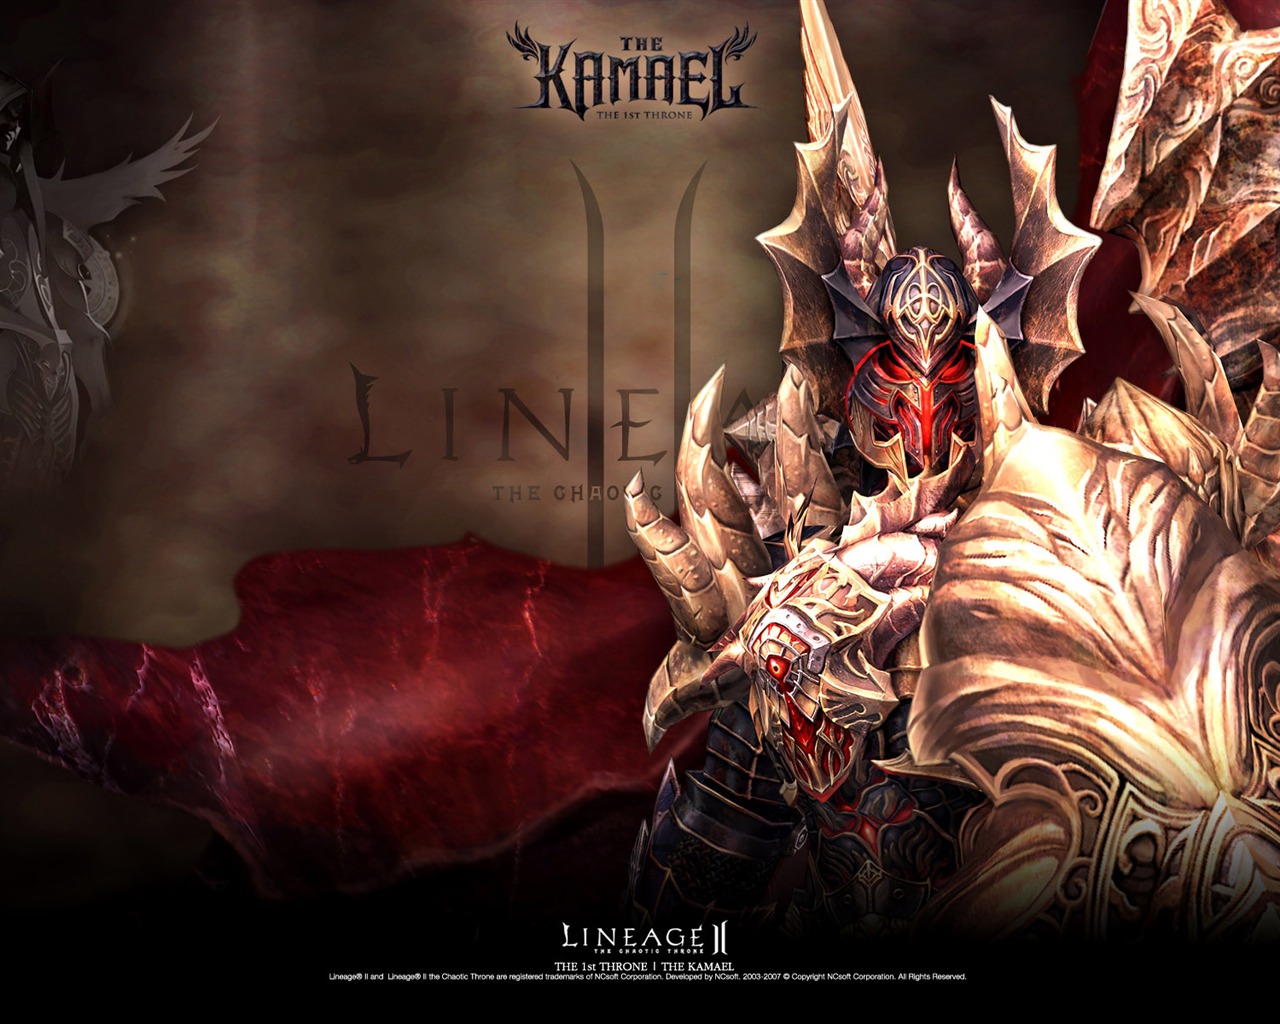 LINEAGE Ⅱ modeling HD gaming wallpapers #11 - 1280x1024